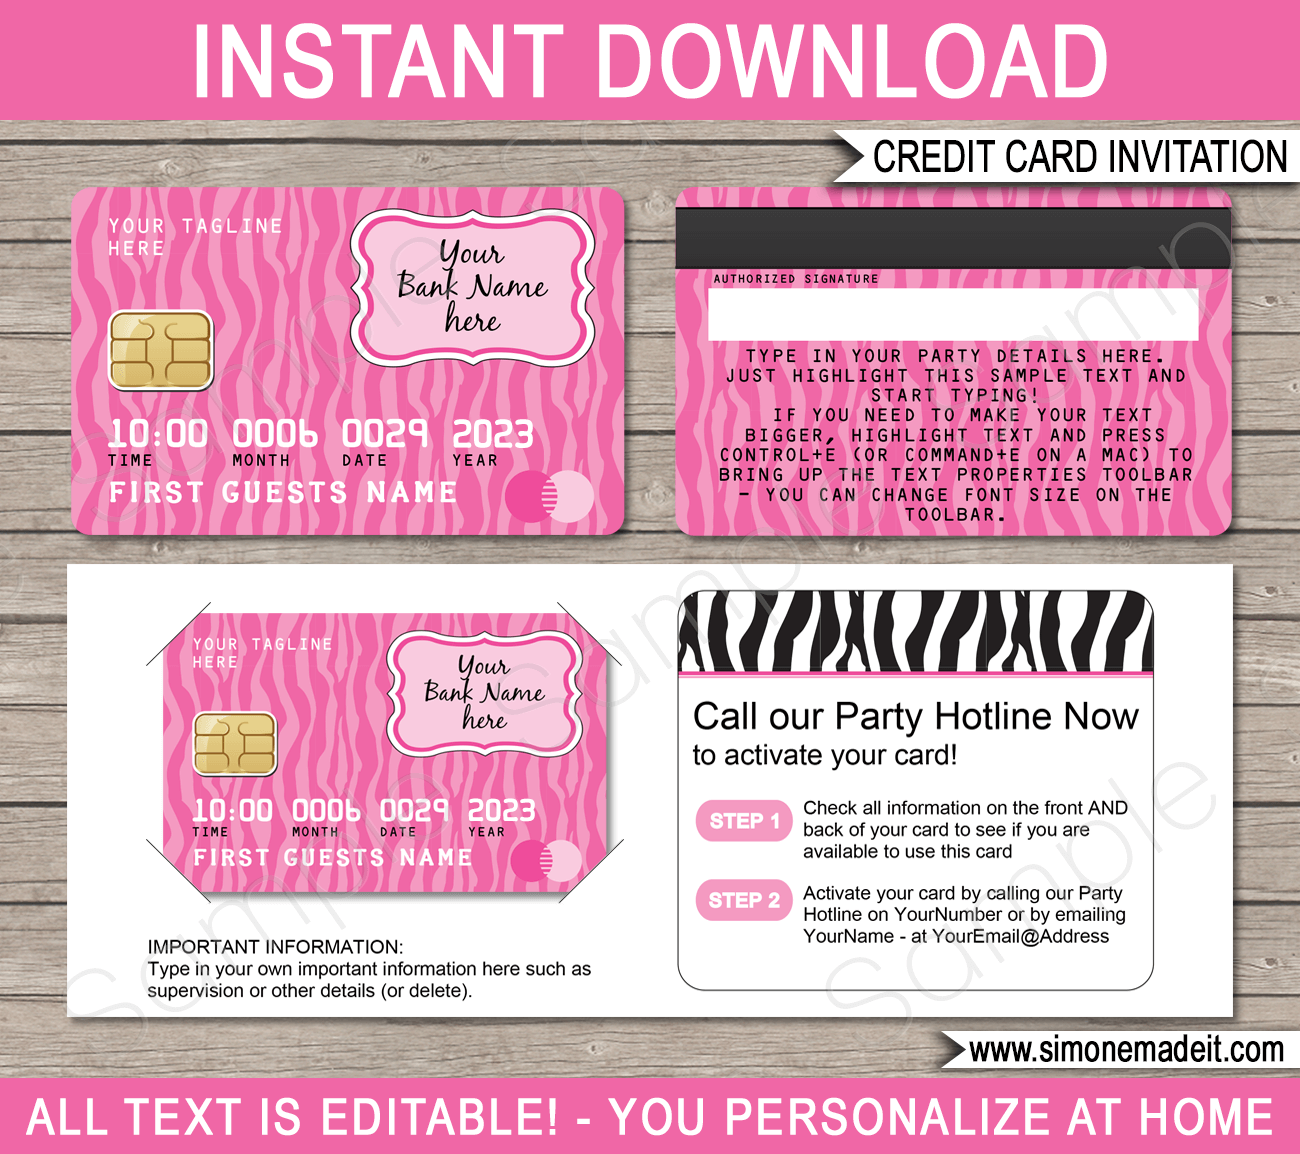 Credit Card Invitations | Mall Scavenger Hunt Party Invitations | Shopping Party Theme | Editable DIY Template | $7.50 INSTANT DOWNLOAD via SIMONEmadeit.com